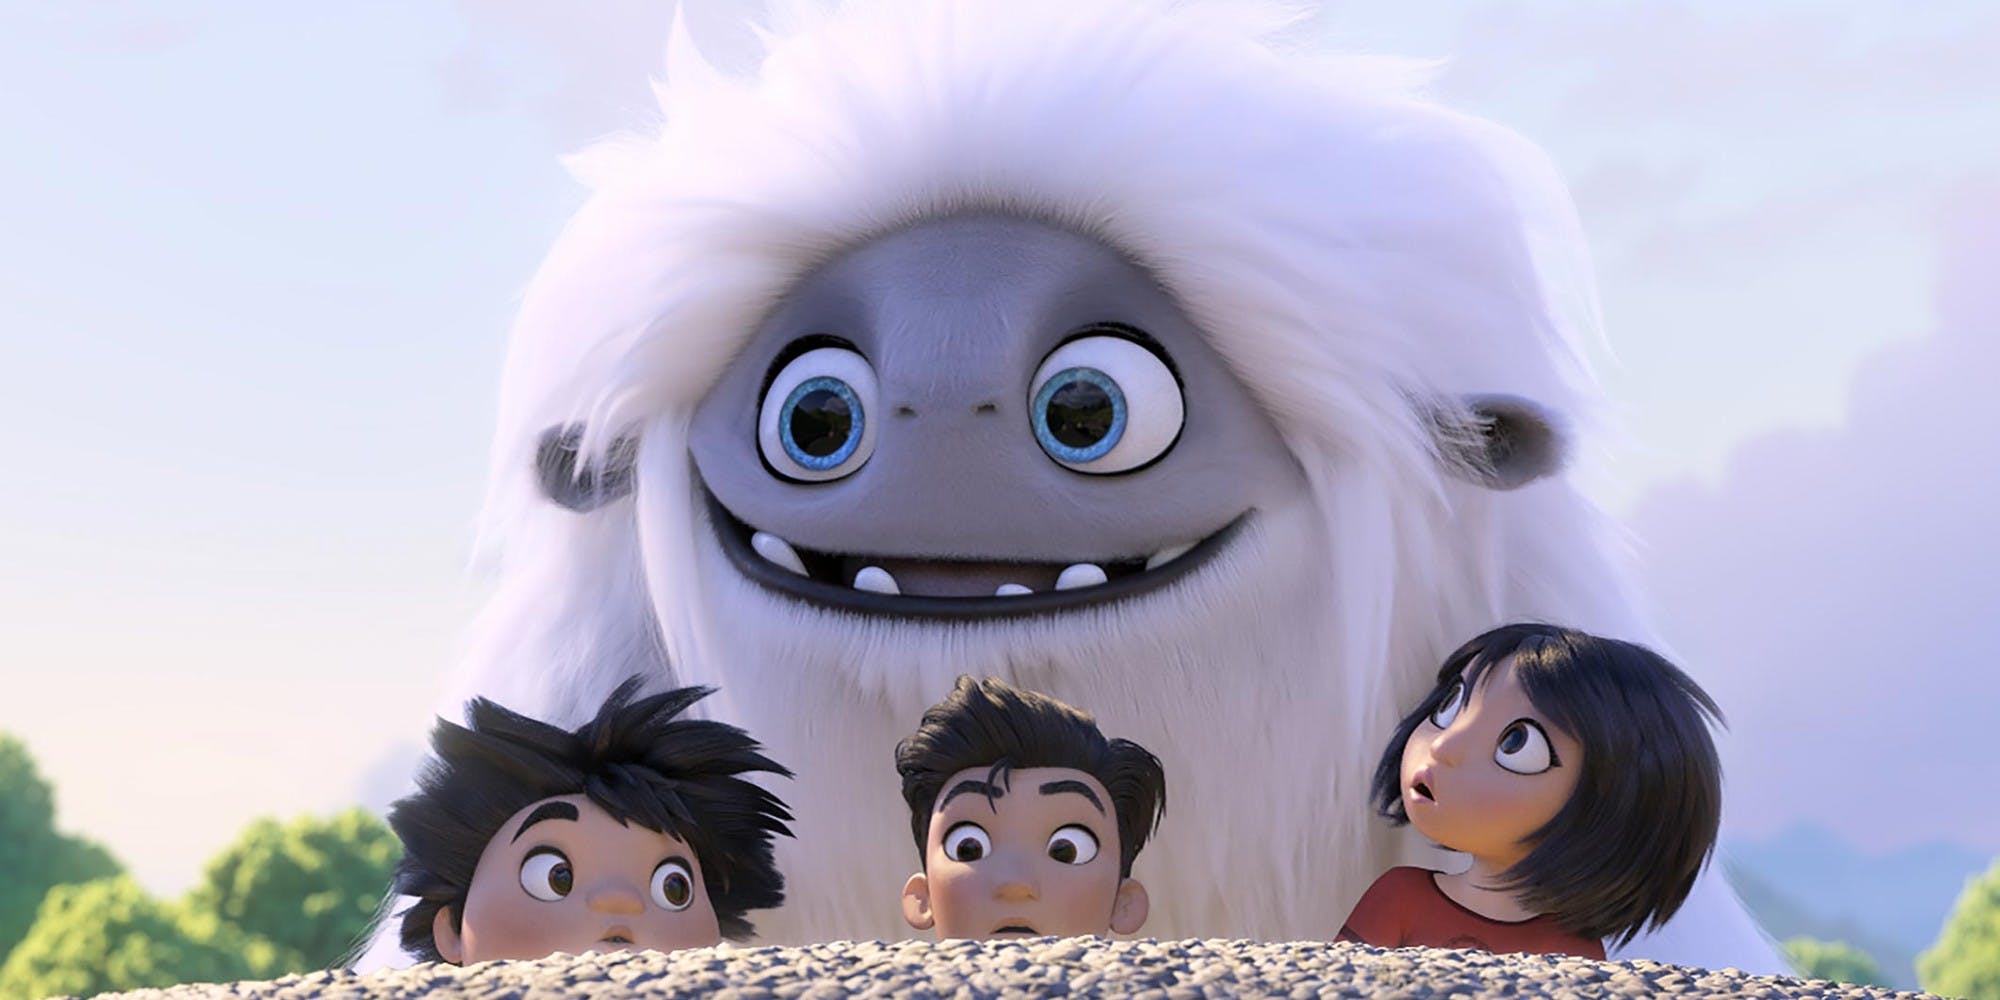 Abominable Movie Wallpaper Download In HD 4k Image 2019